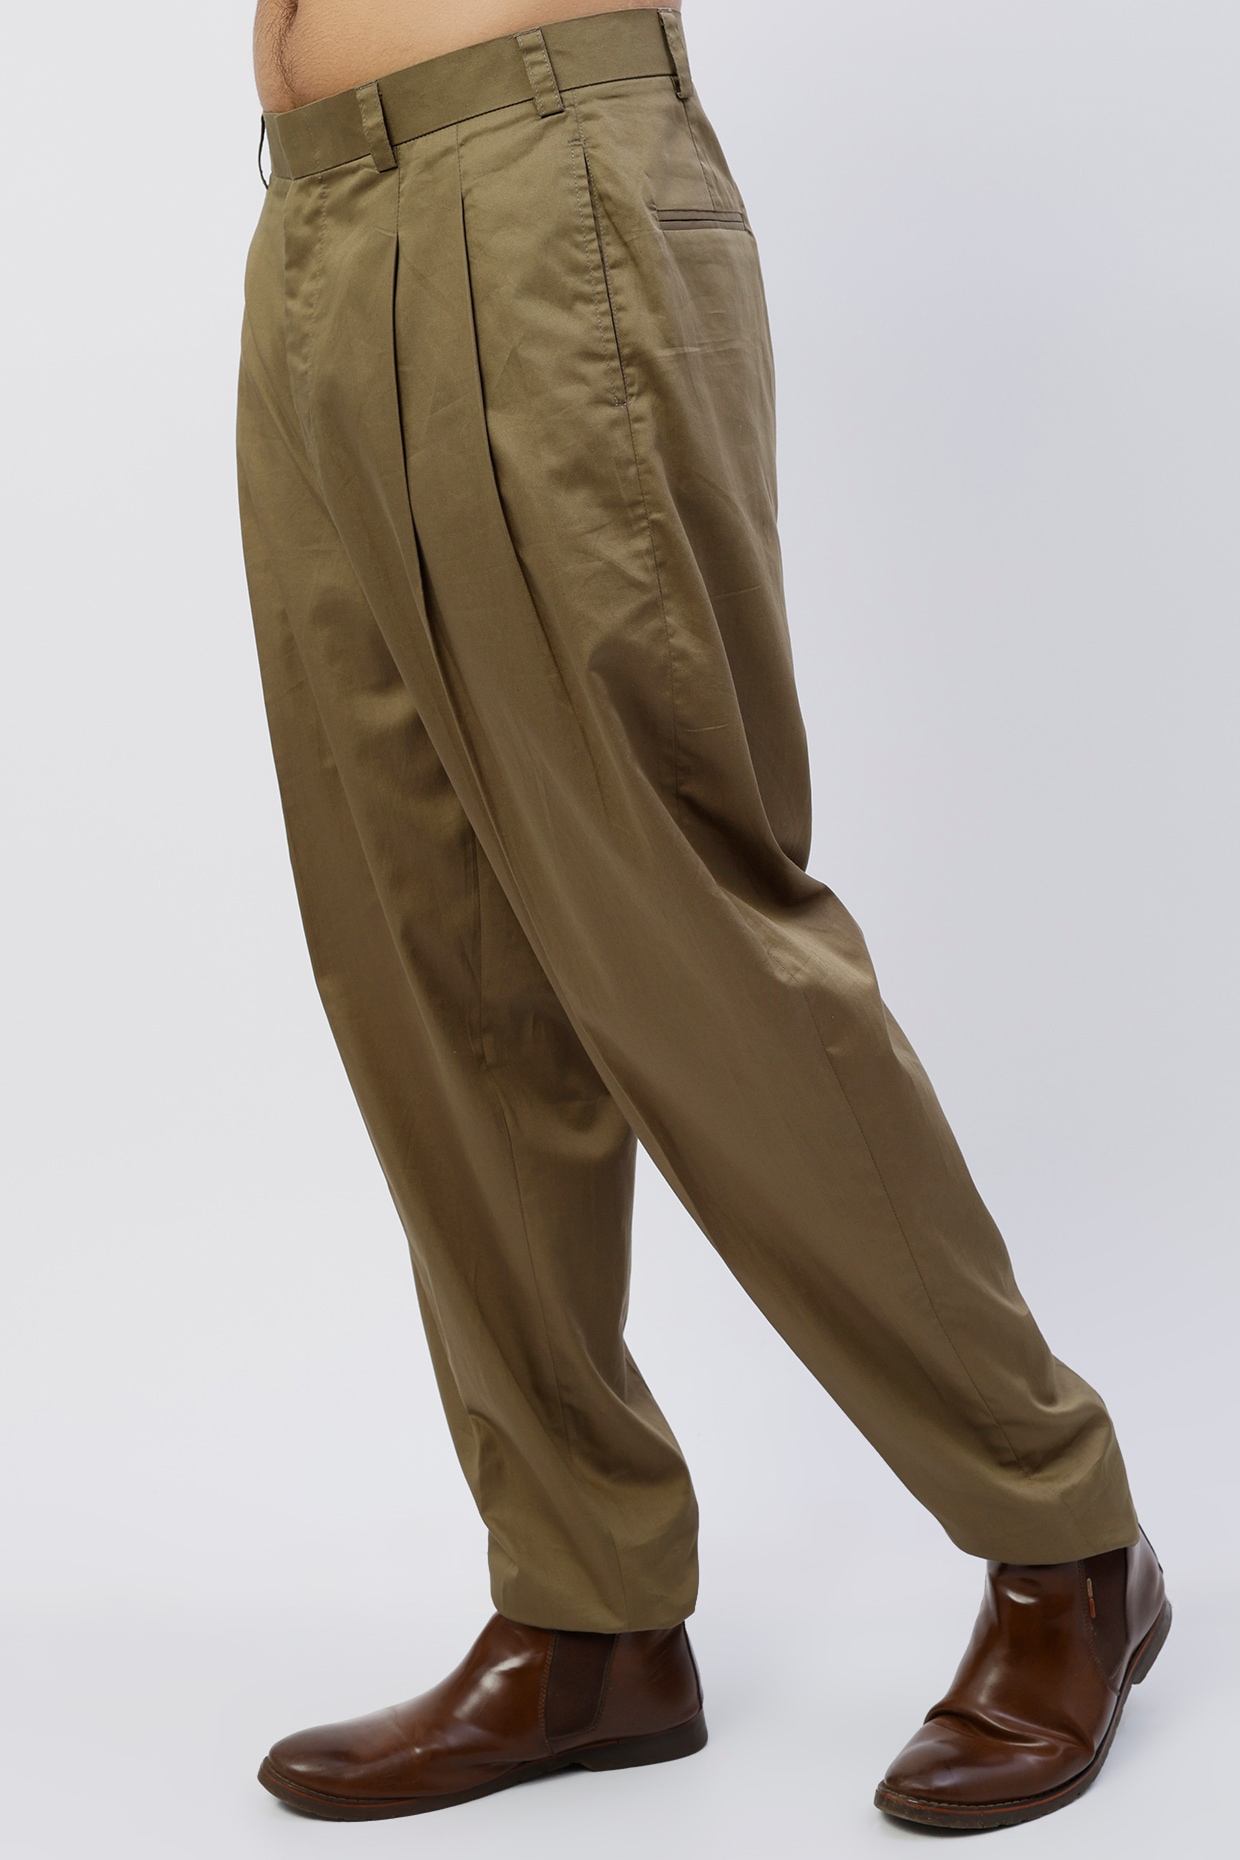 Pleated Knee Cargo Pants  Cargo pants outfit men Brown pants men Cargo  pants men